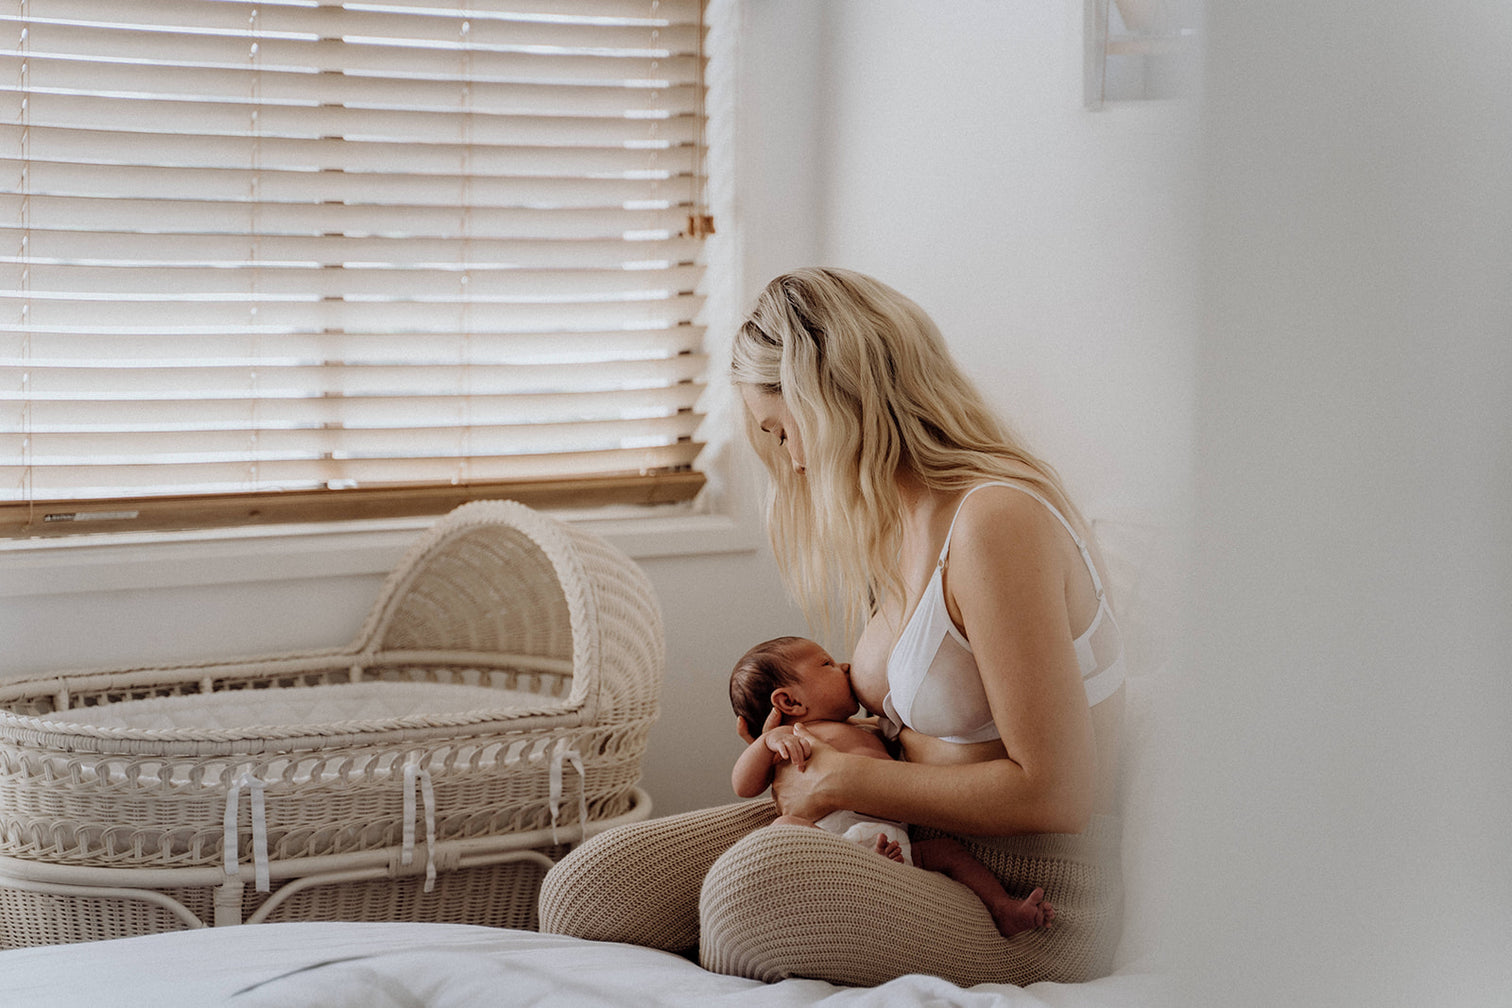 Sore nipples during breastfeeding what to do? – Lovekins